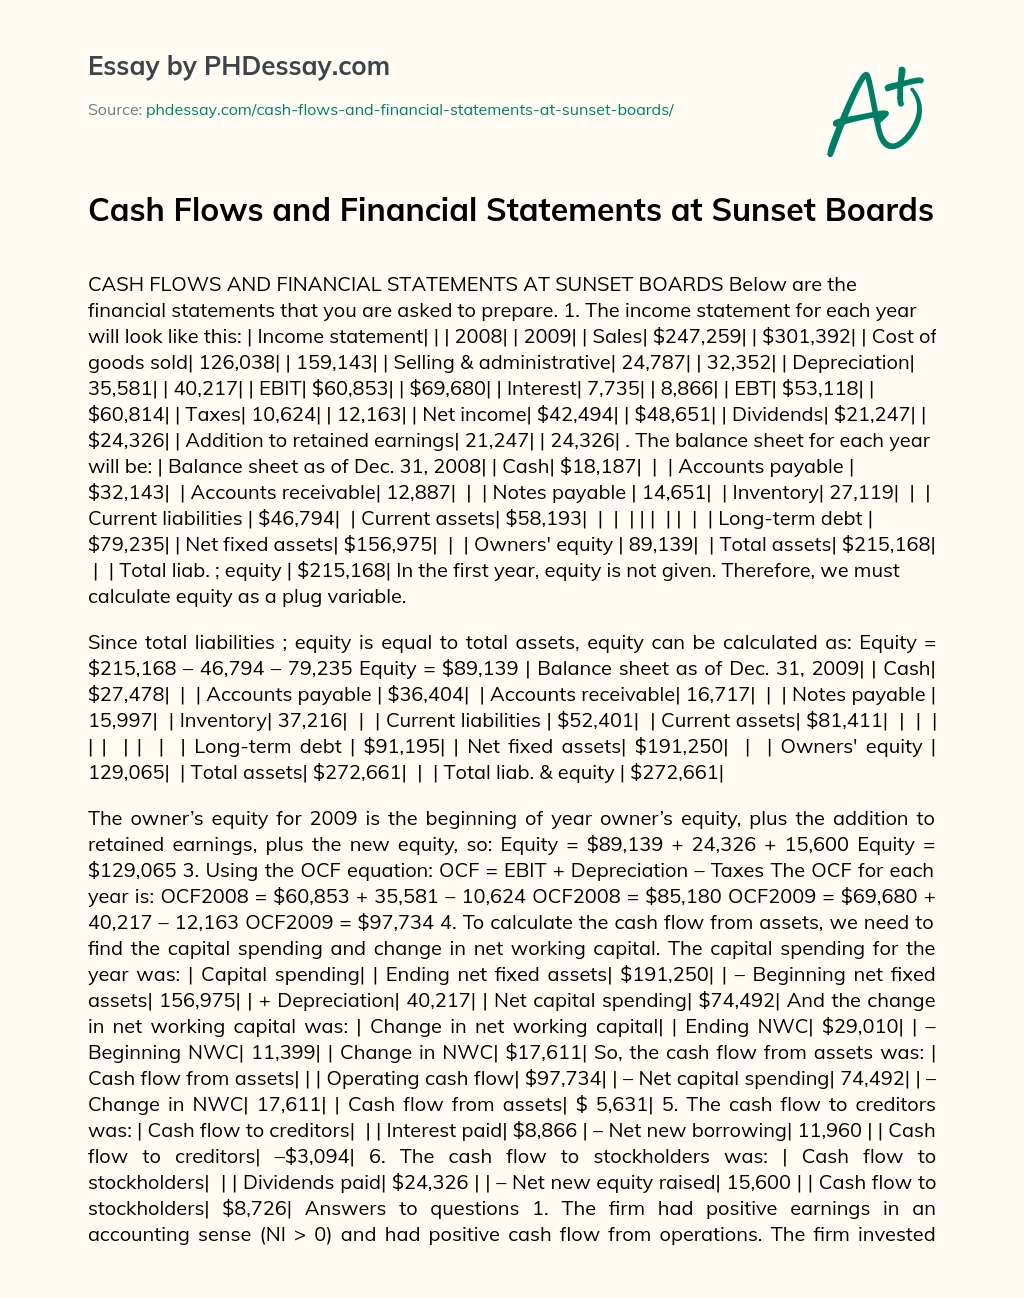 Cash Flows and Financial Statements at Sunset Boards essay